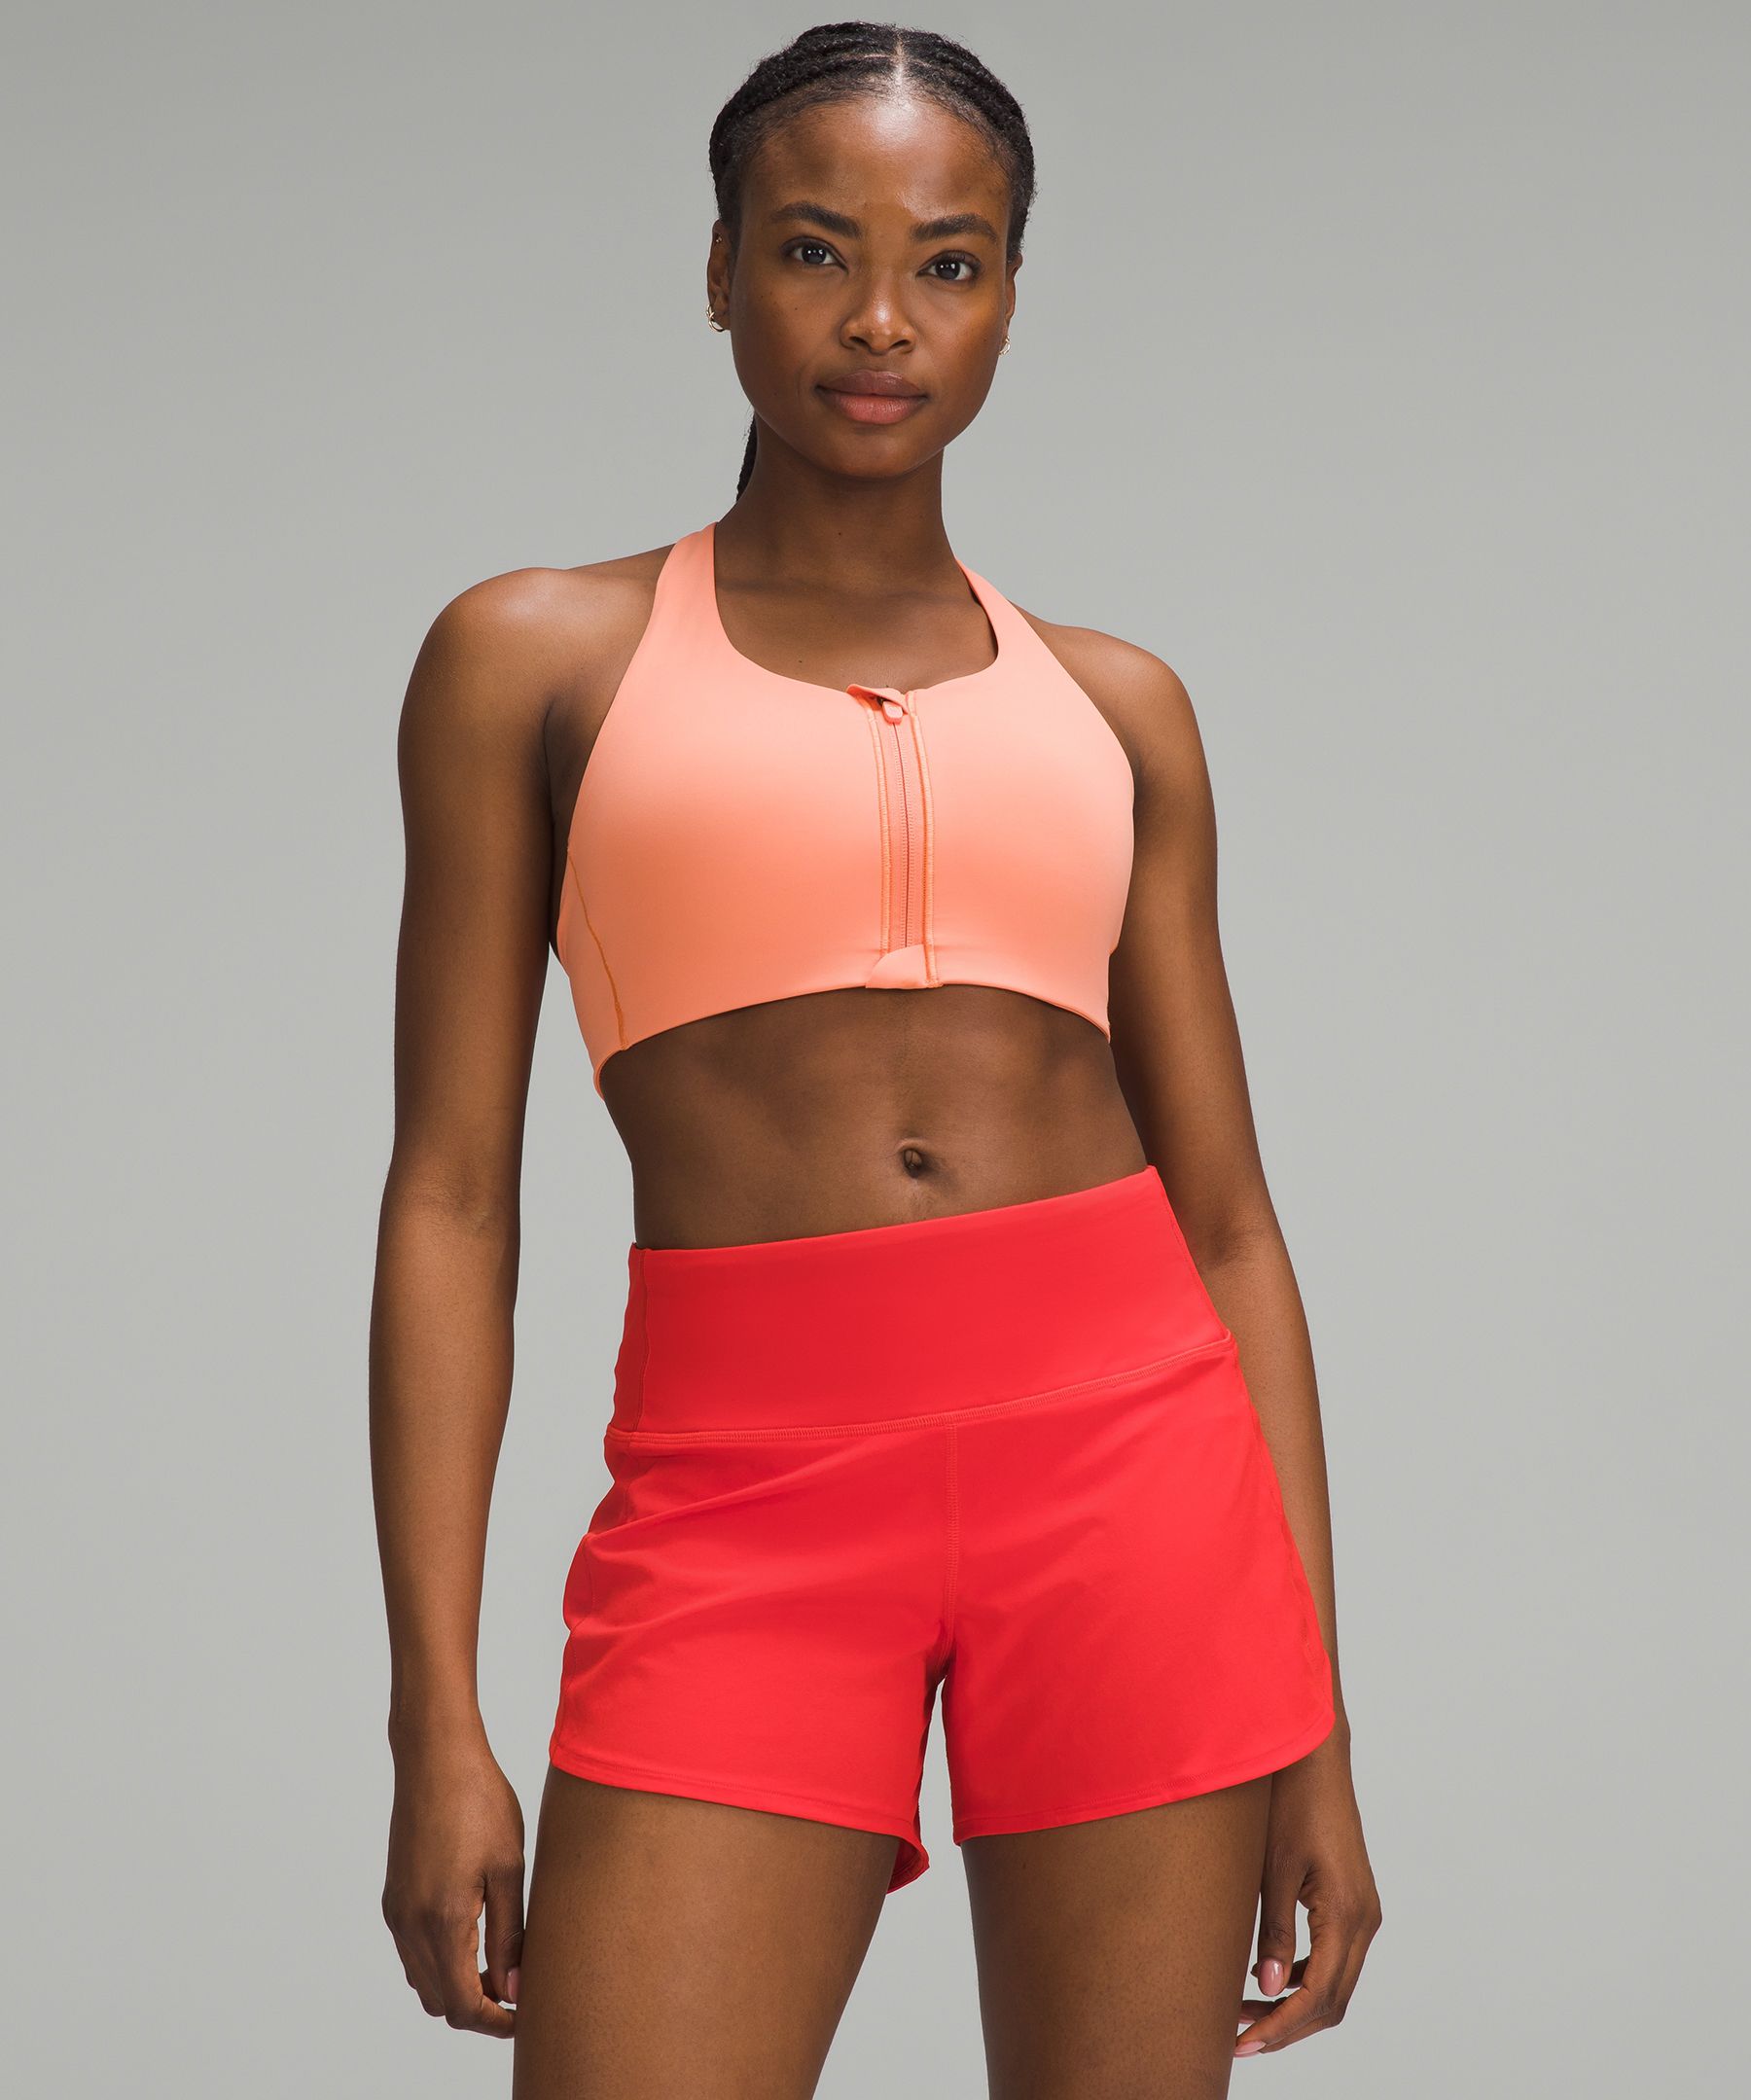 High Impact Yoga Sports Bra For Women 75% Nylon And 25% Spandex Gym Wear  Sets Women With Push Up Technology For Fitness, Running, And Athletic  Performance From Shamomg, $15.38